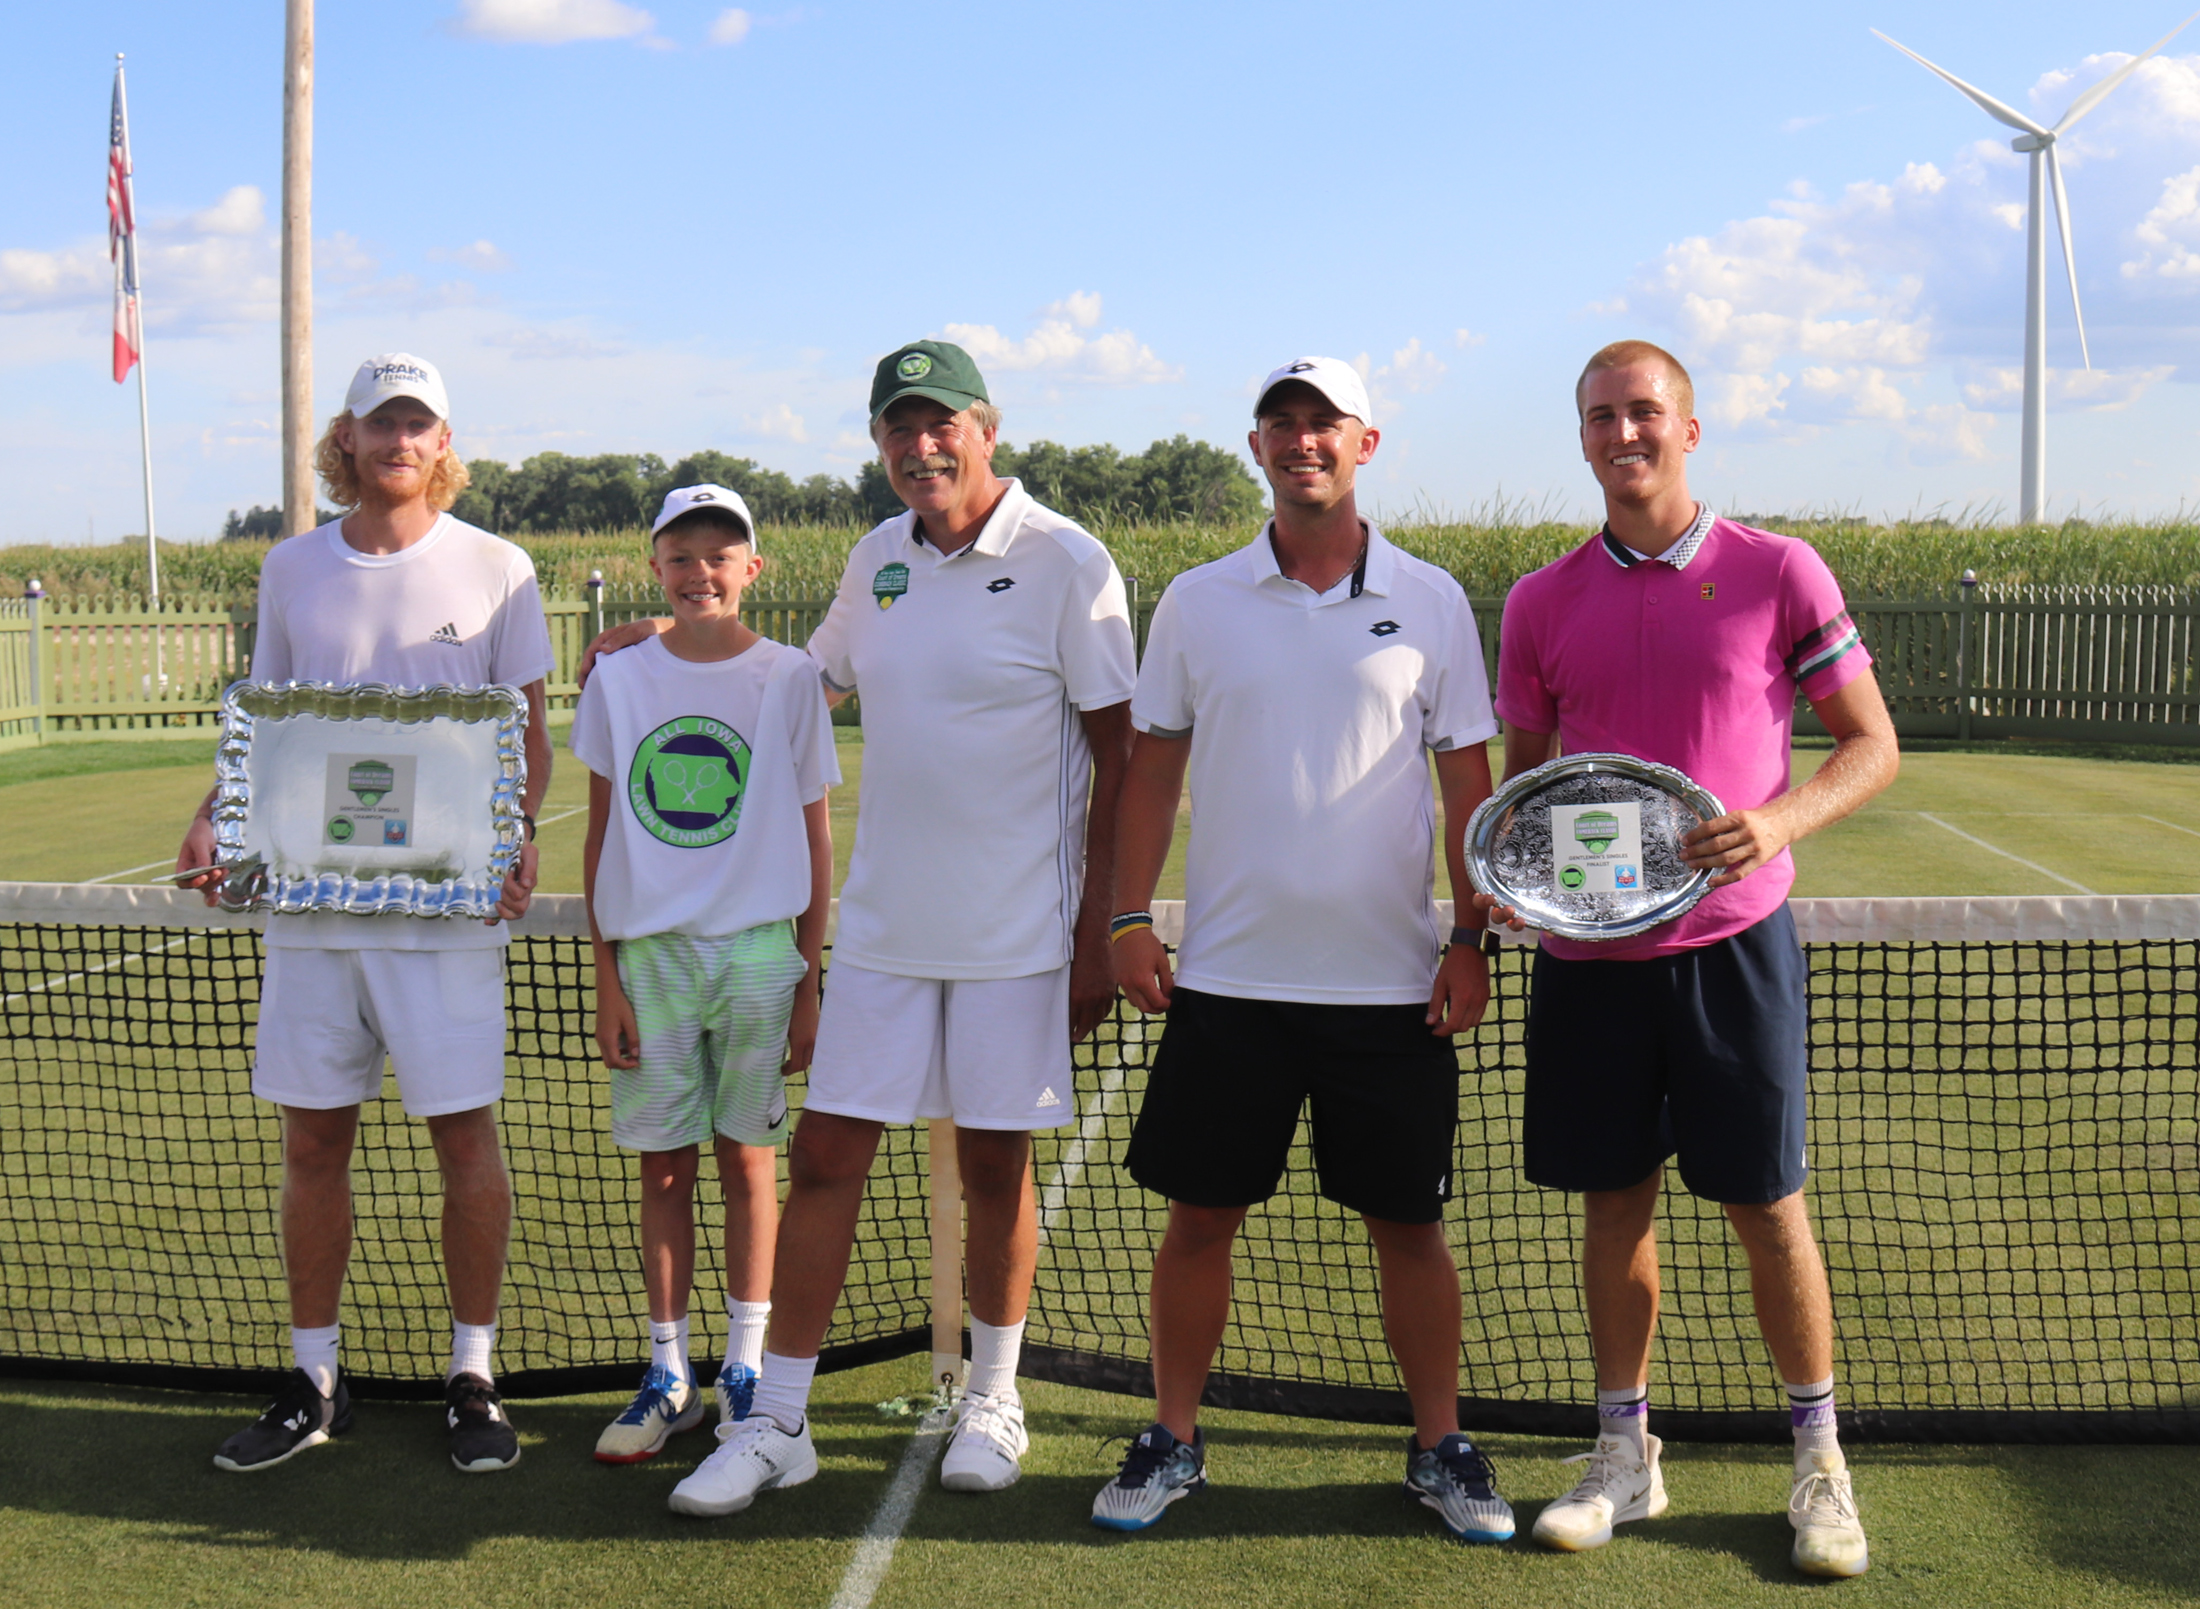 Players leave mark at Court of Dreams Comeback Tennis Series Classic